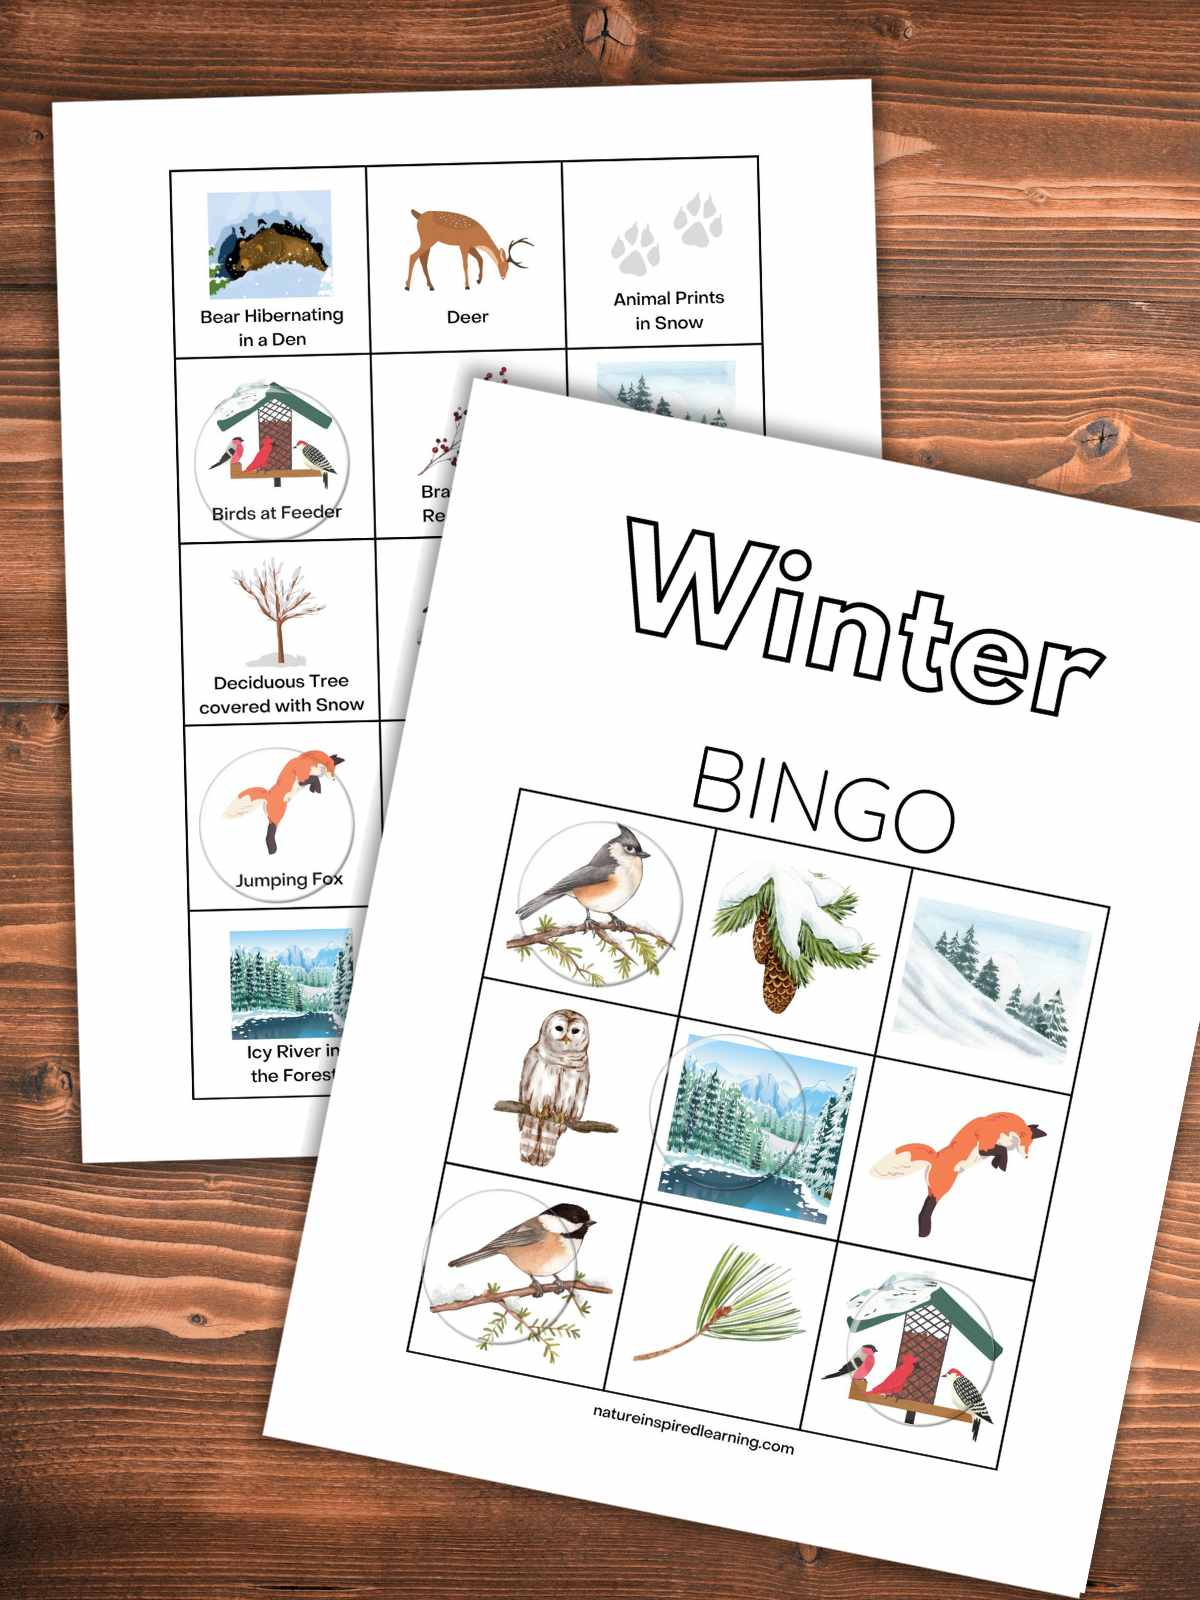 Printable bingo card with winter designs on top of the calling cards on a wooden background